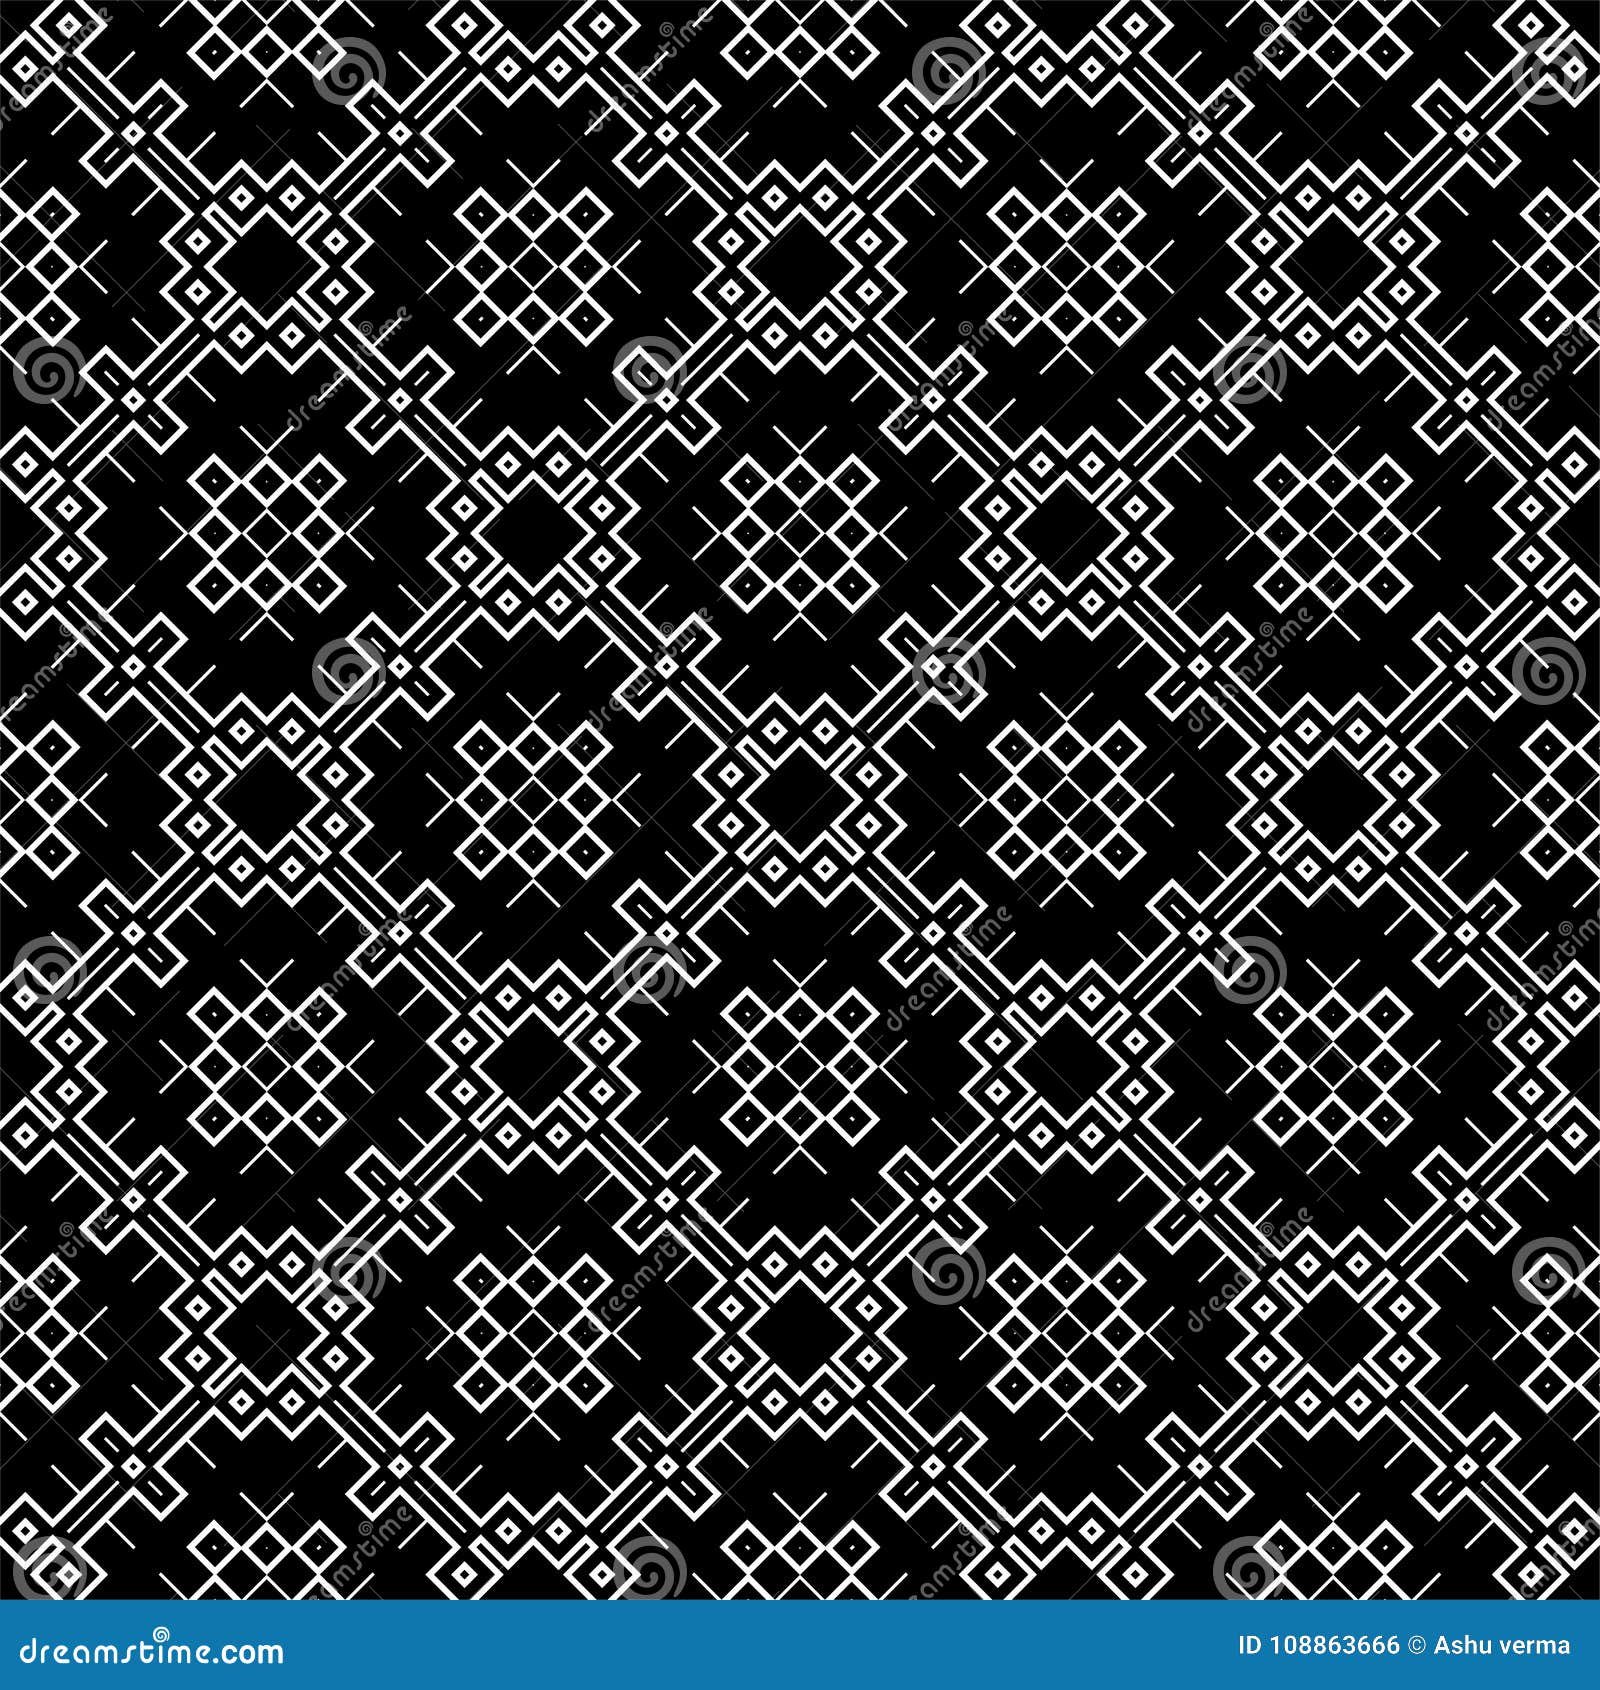 Seamless Pattern Background In Black And White Vintage And Retro